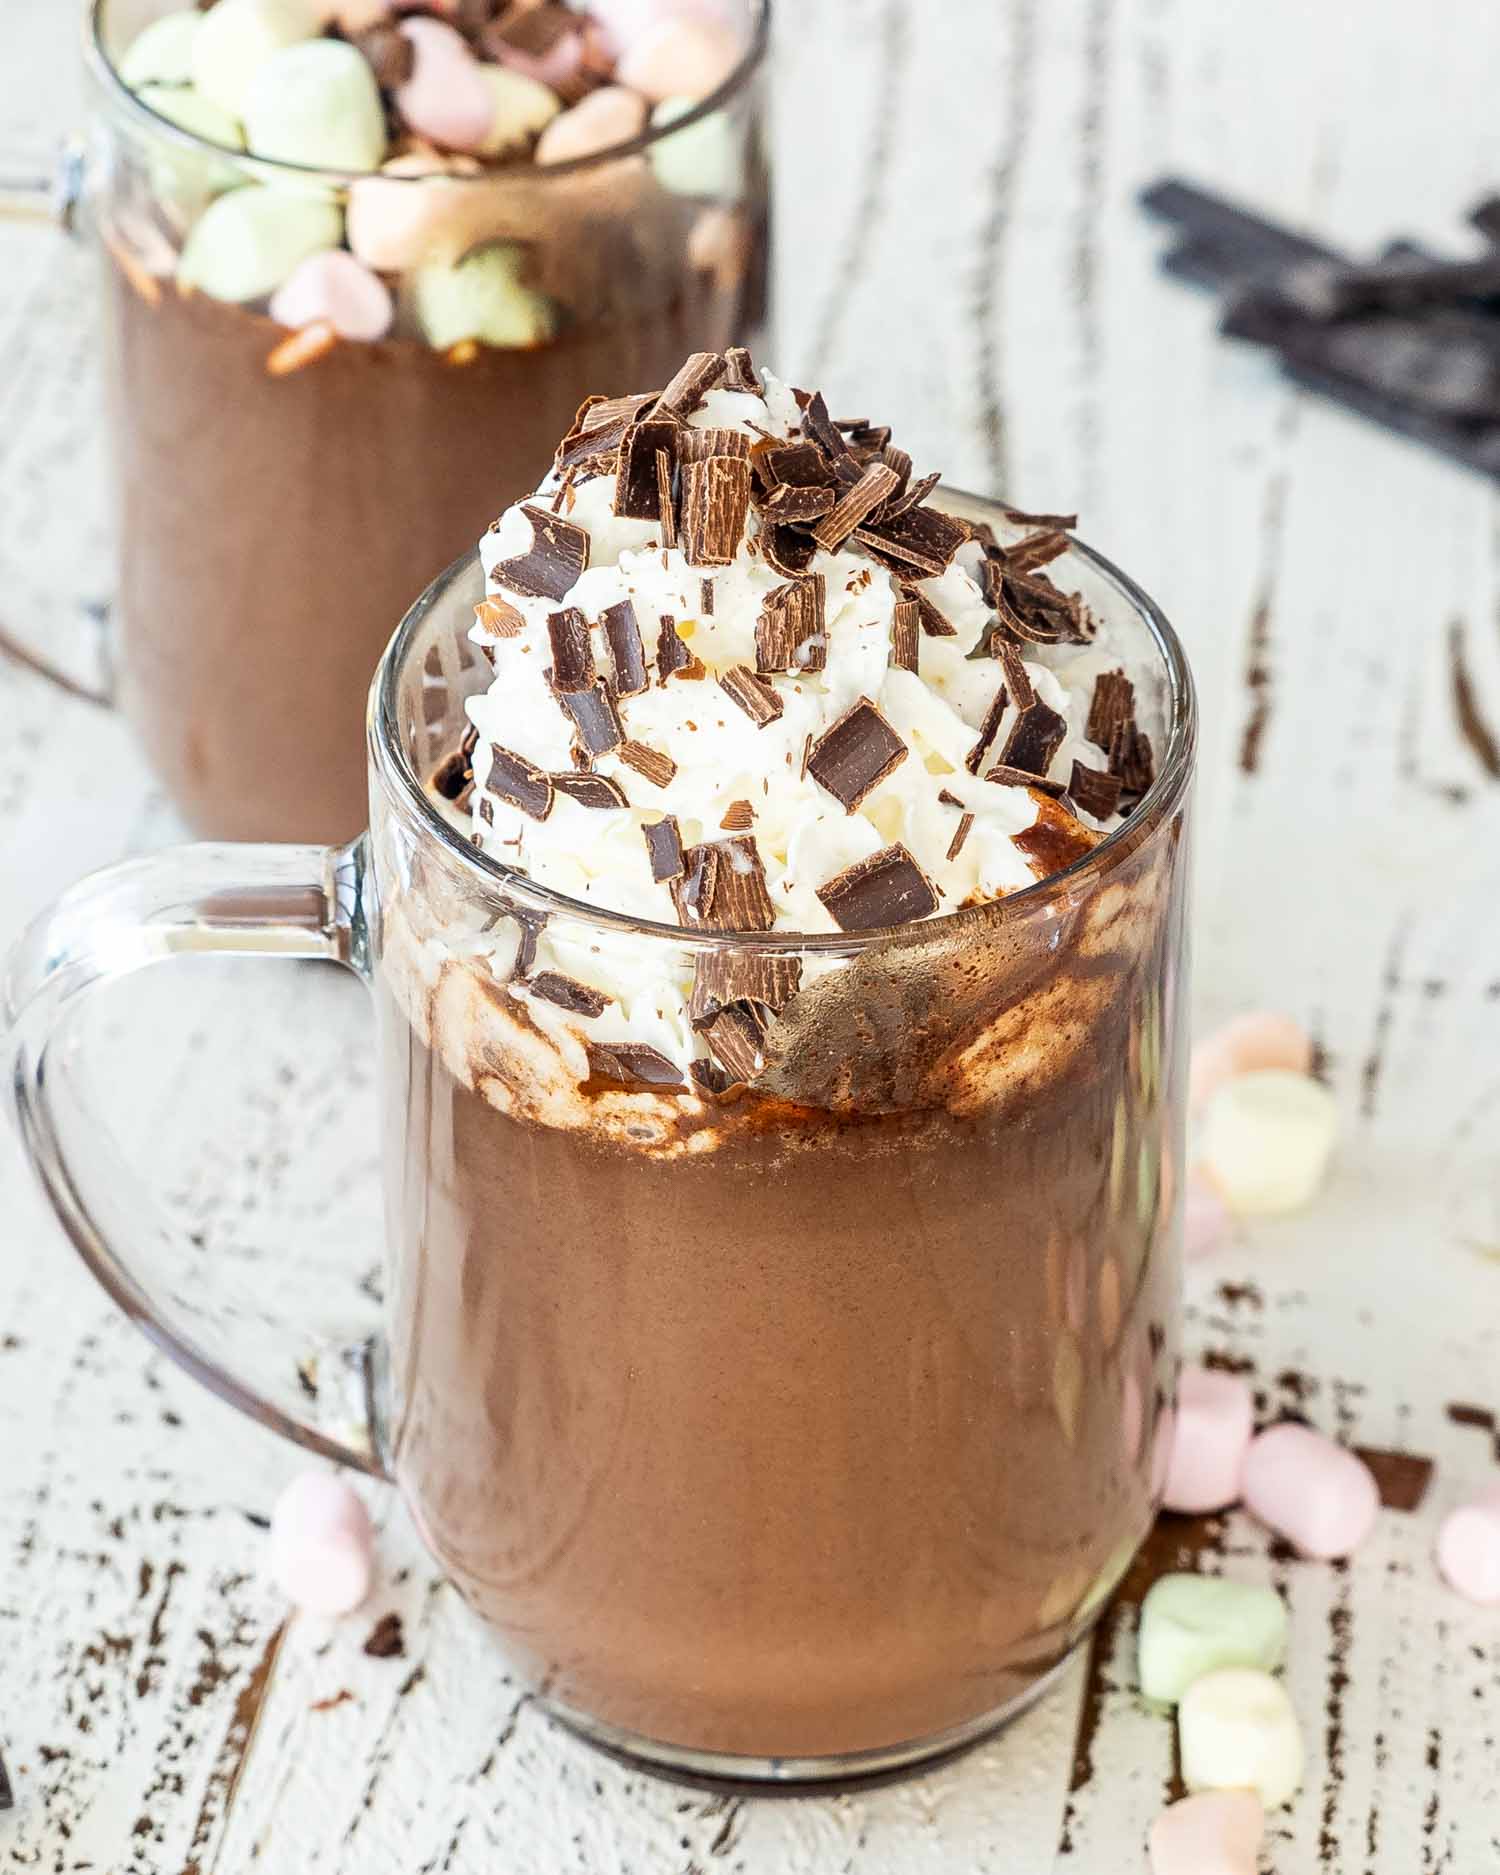 a hot chocolate in a mug topped with whipped cream and chocolate shavings.